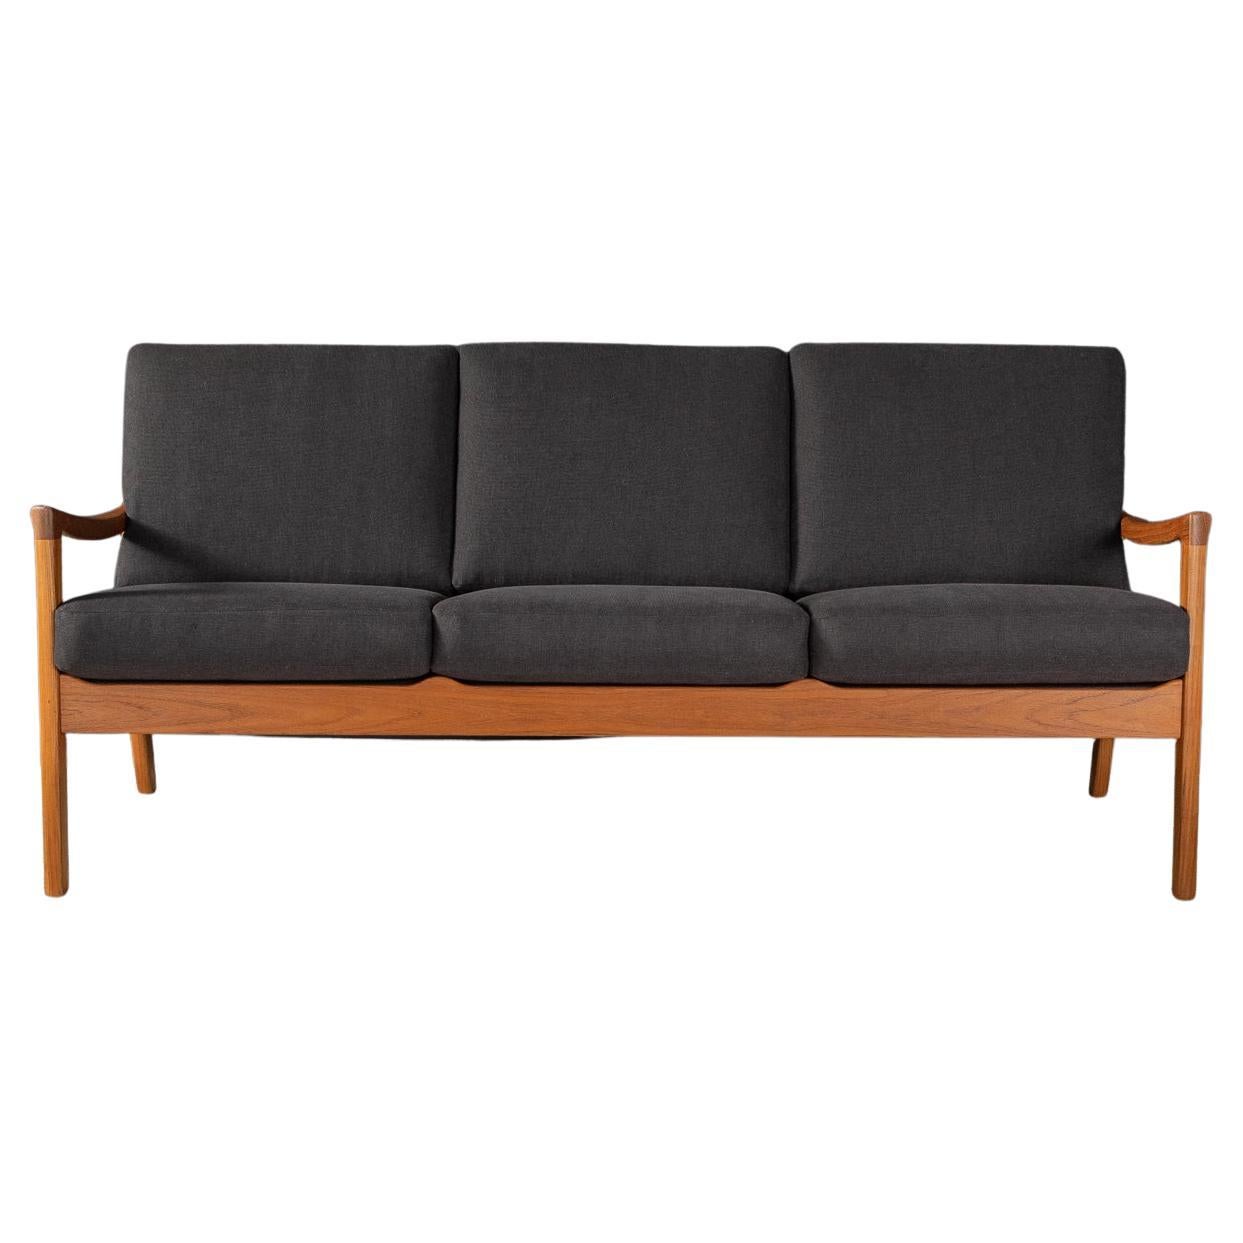 1960s Sofa by Ole Wanscher for Cado Danish Design